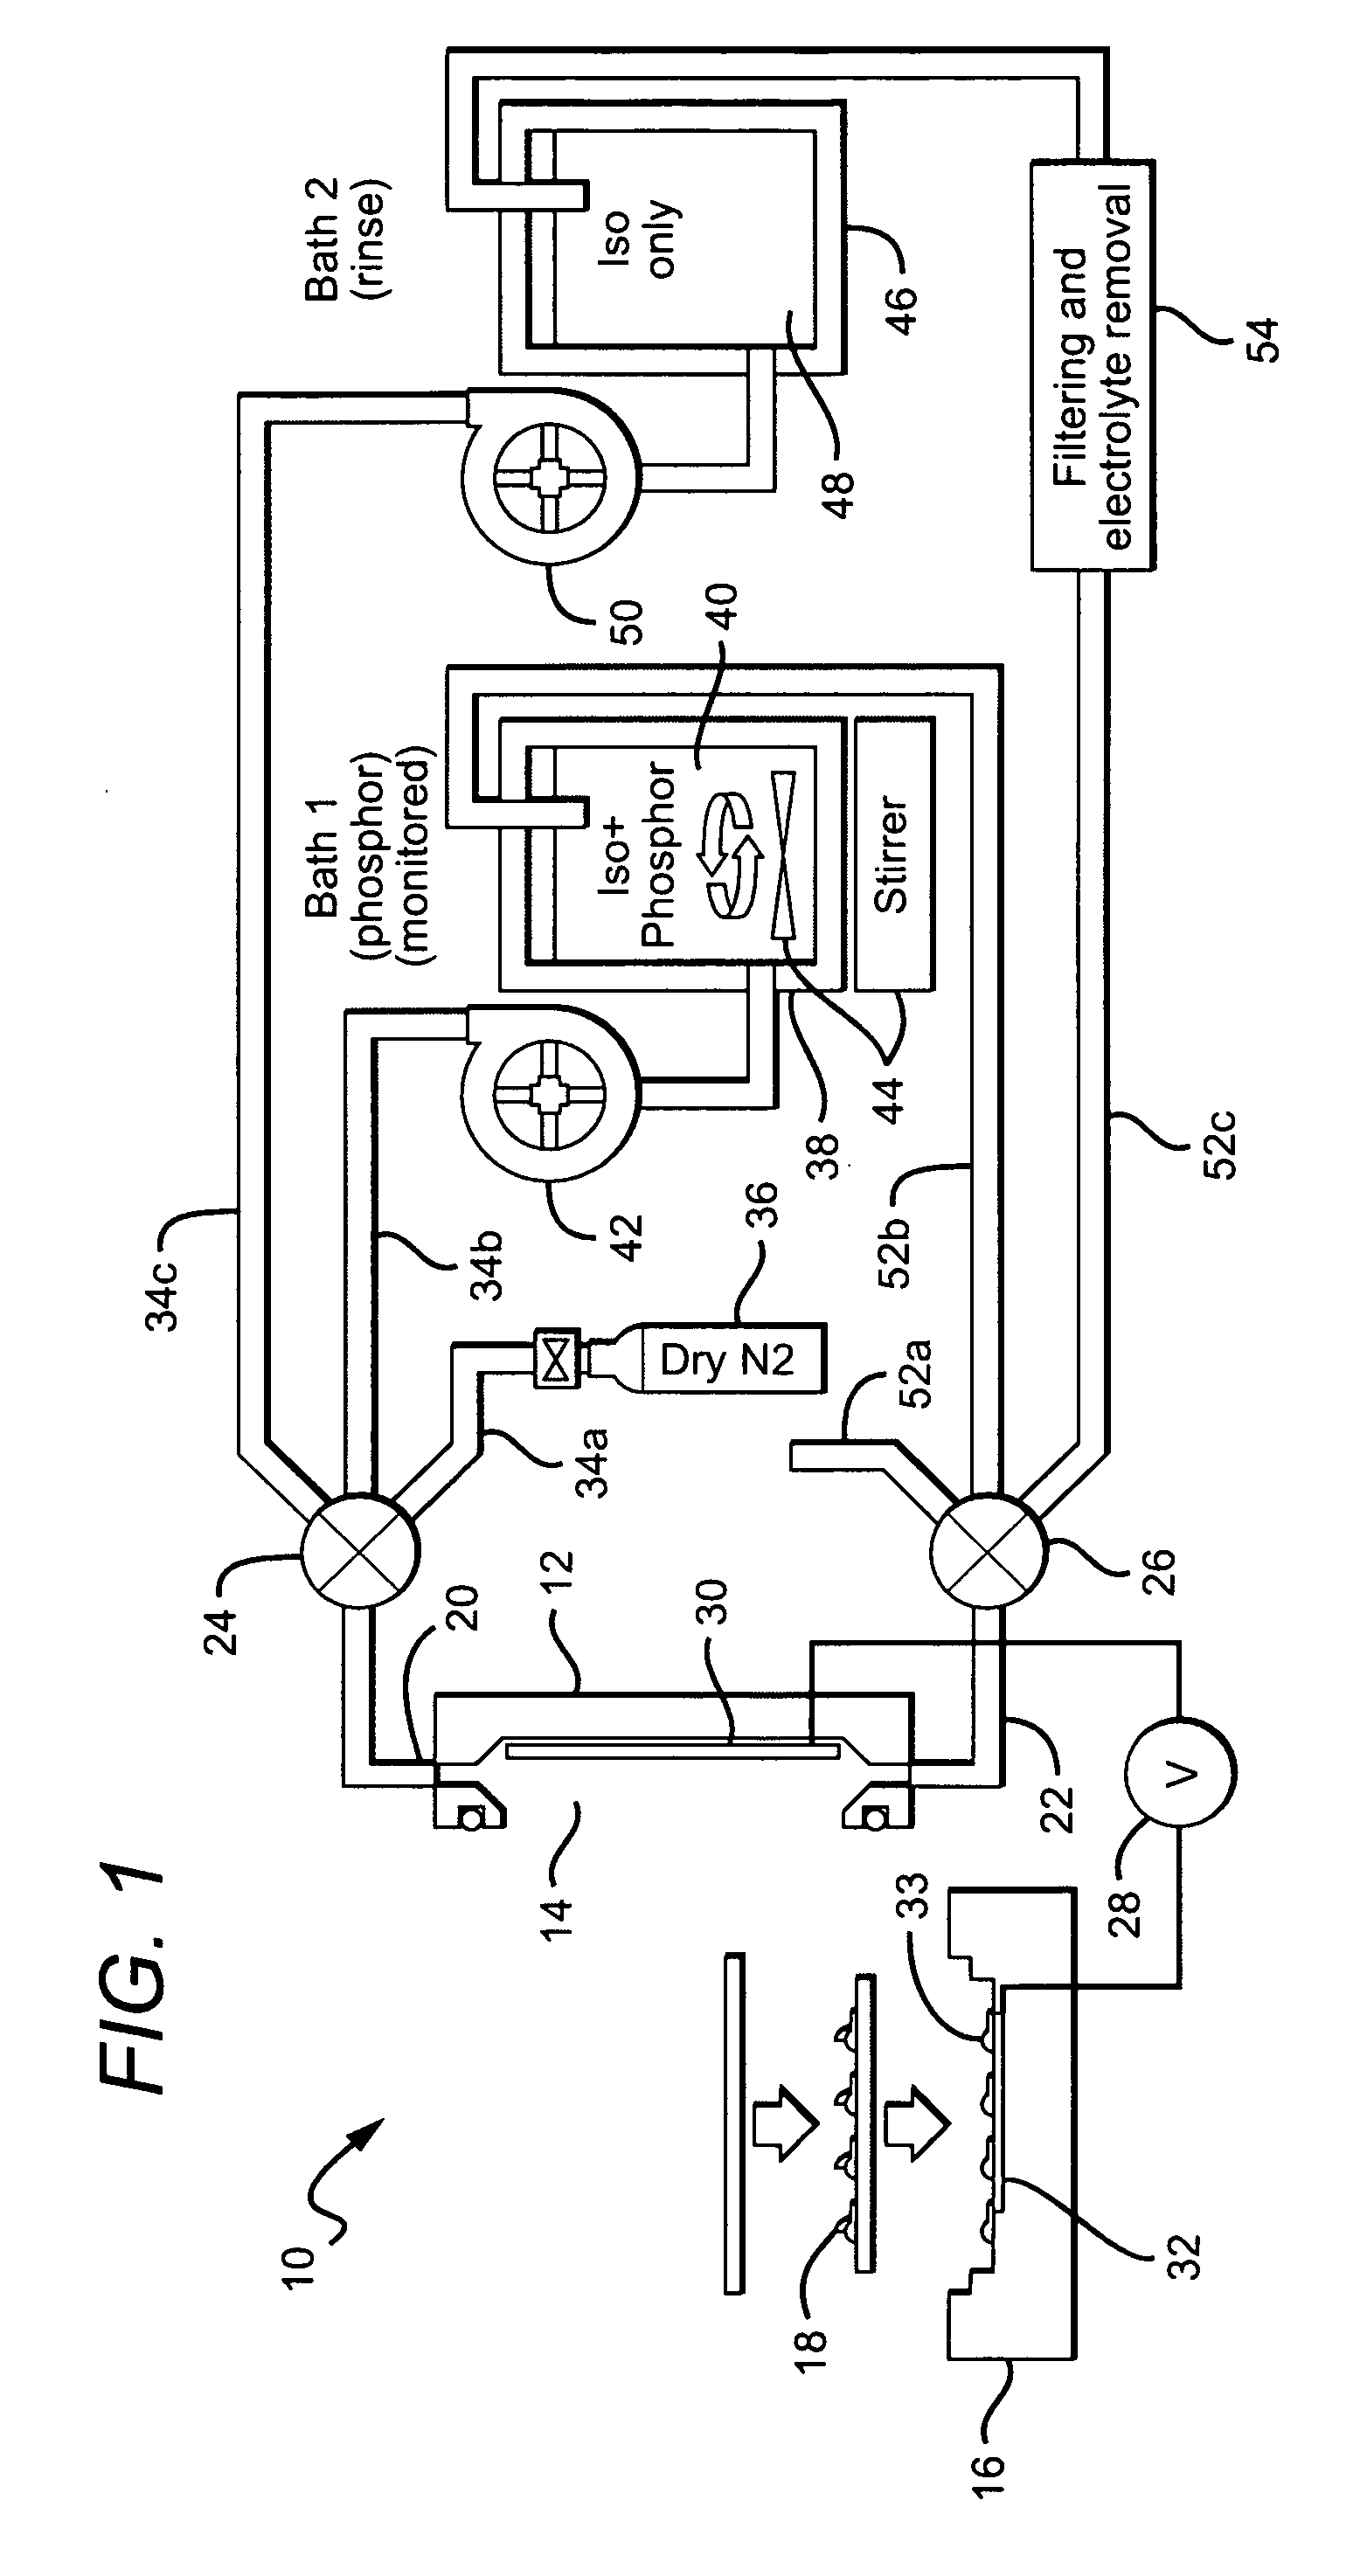 System for and method for closed loop electrophoretic deposition of phosphor materials on semiconductor devices